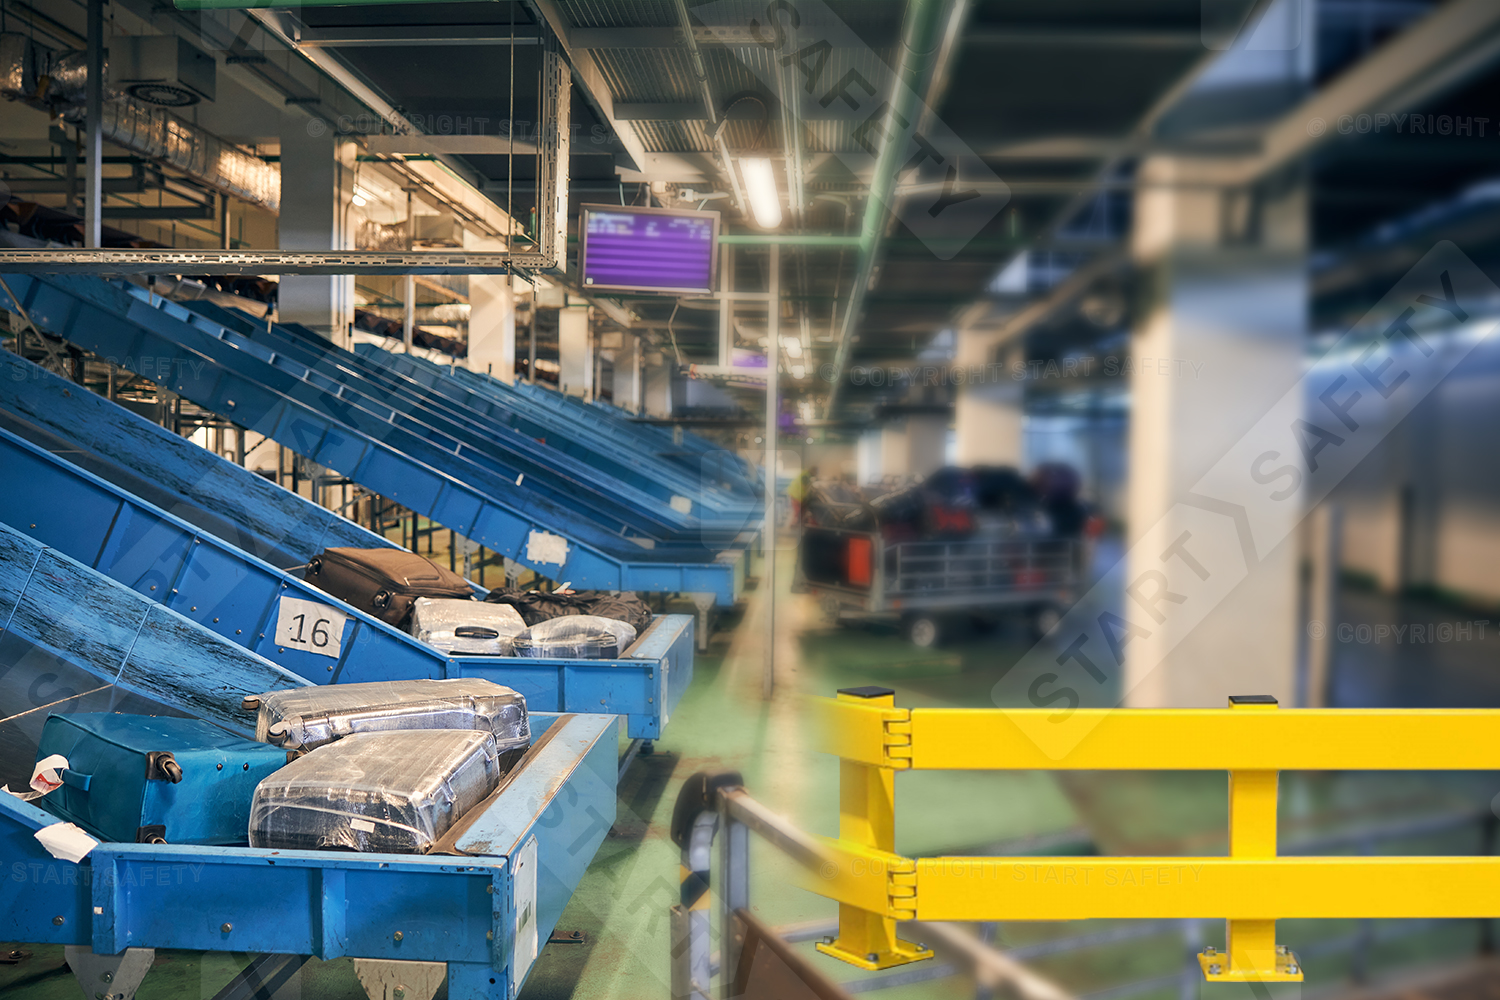 Impact Protection Rail In Baggage Sorting Environment